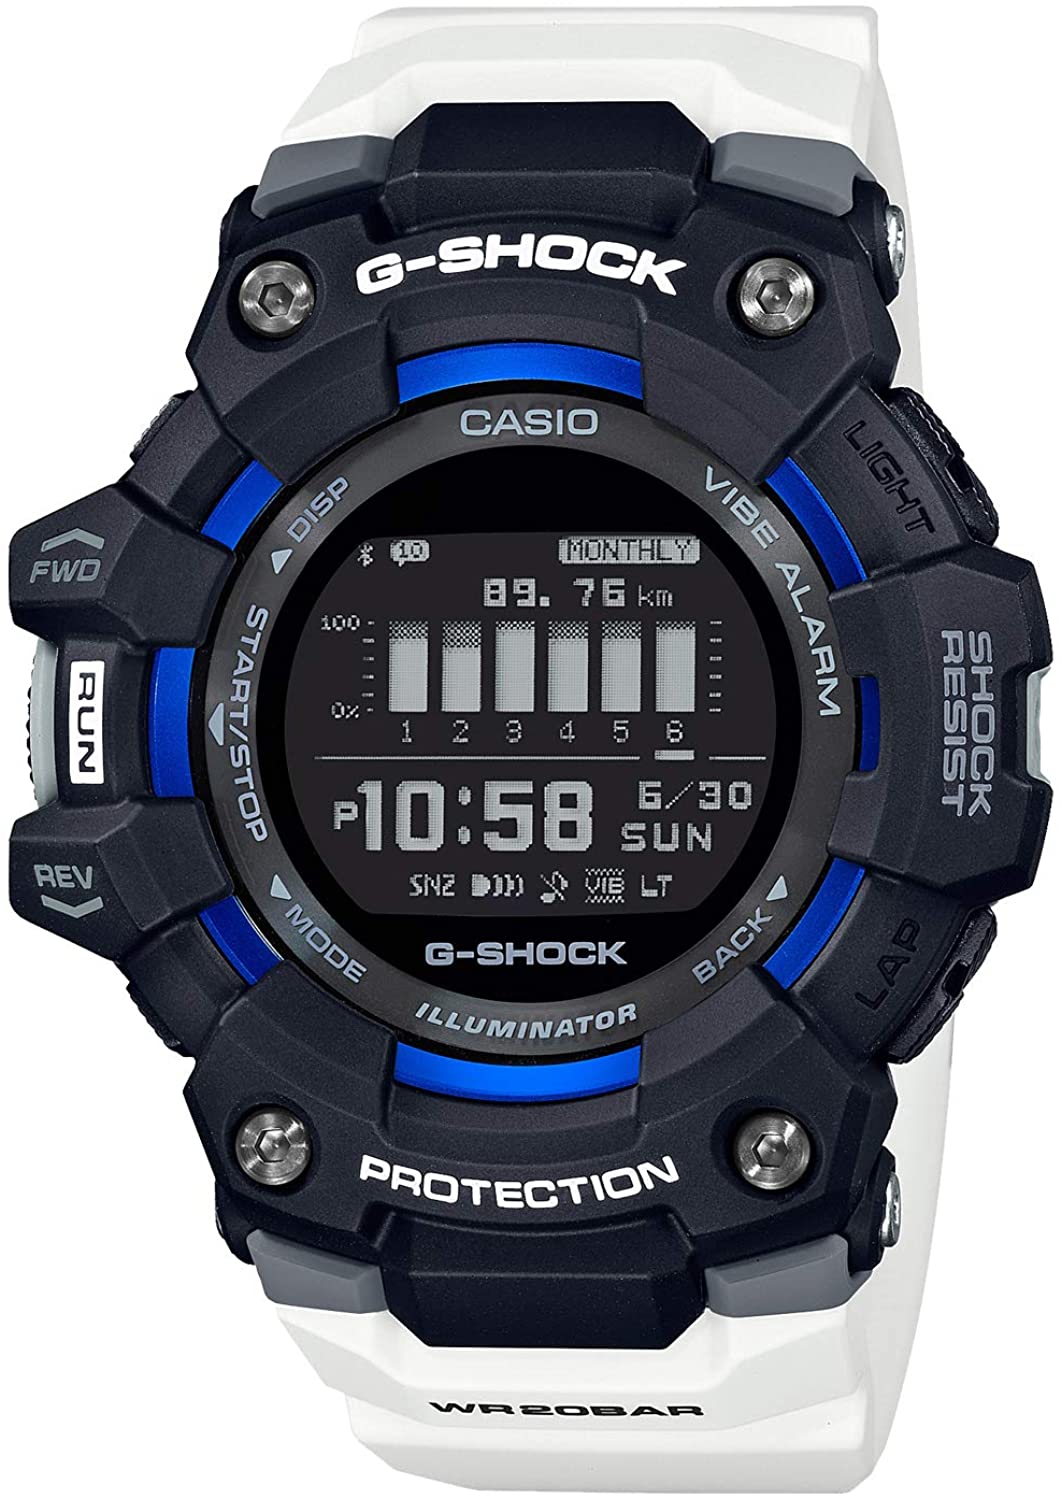 Casio G Shock Watch Gbd 100 1a7dr Lifestyle Collection